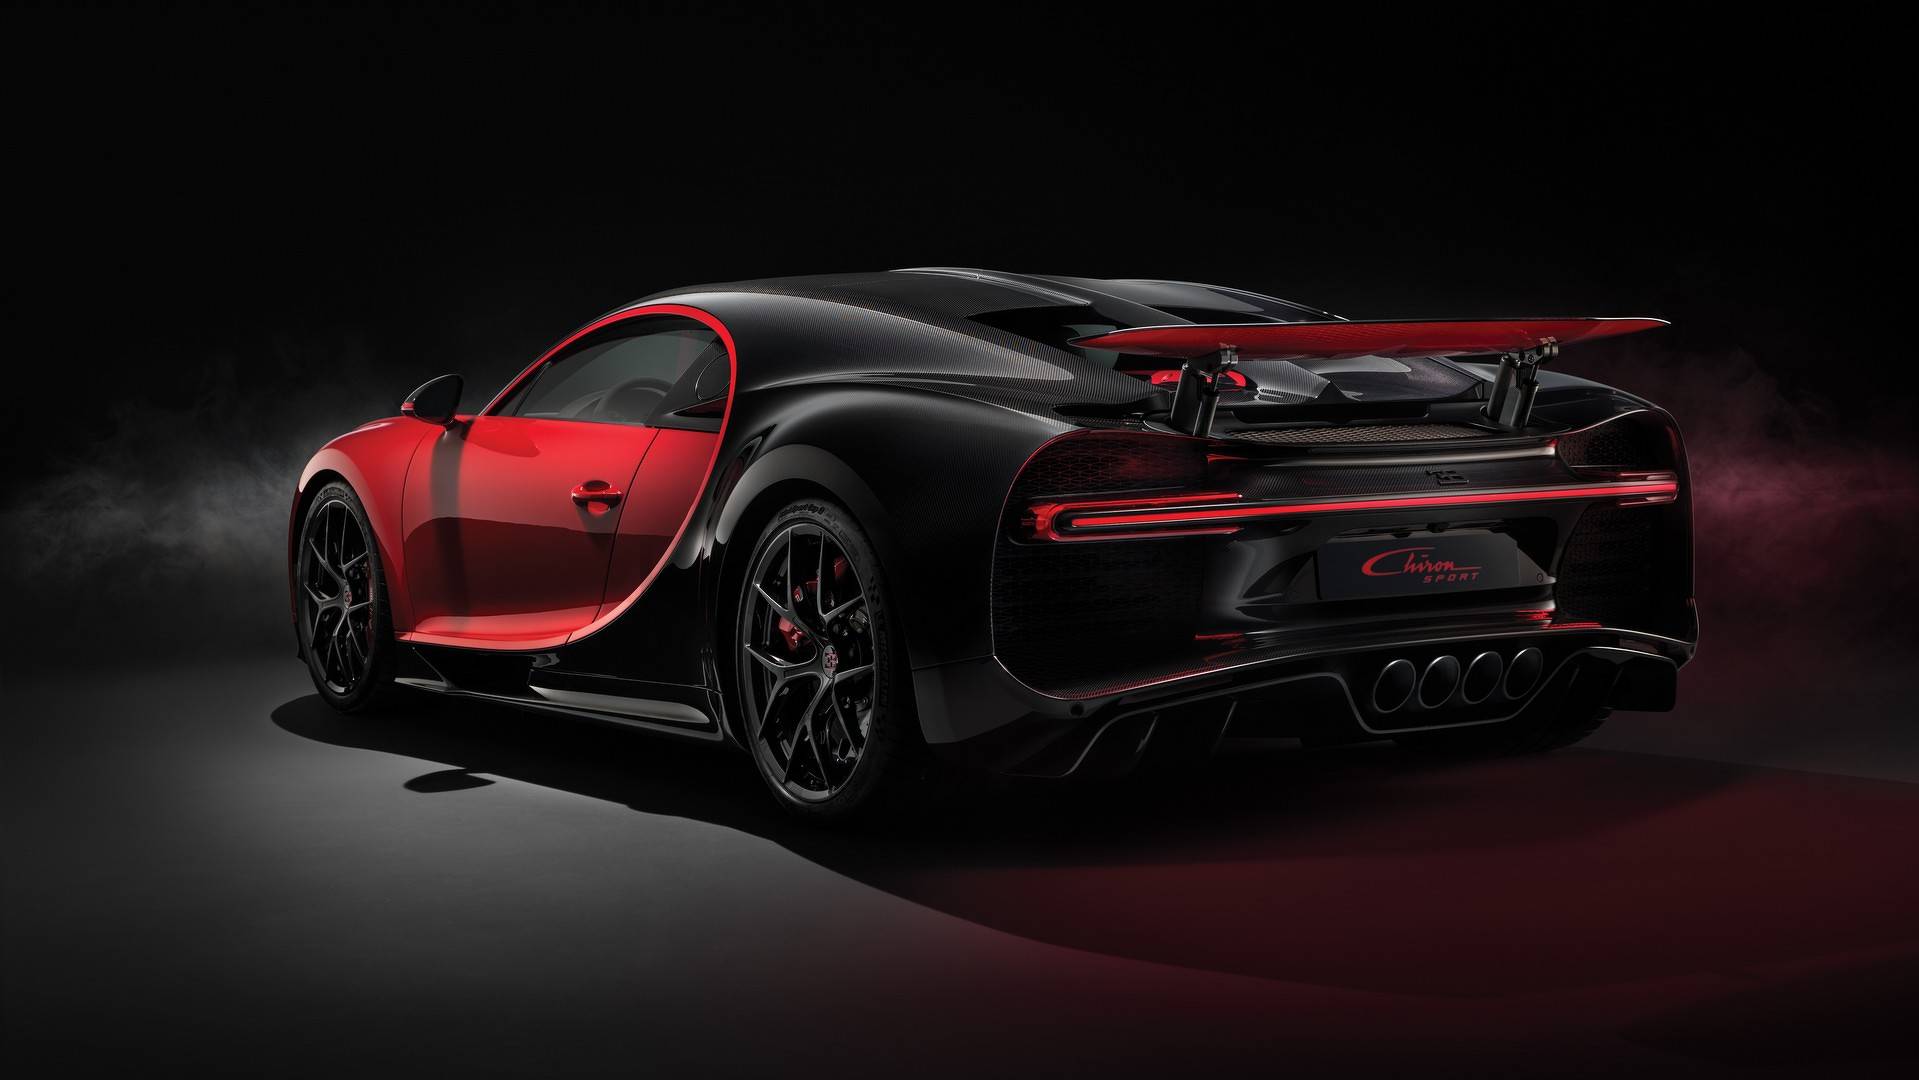 FormaCar: Rumor: Bugatti Chiron Divo has less HP at 2x the price